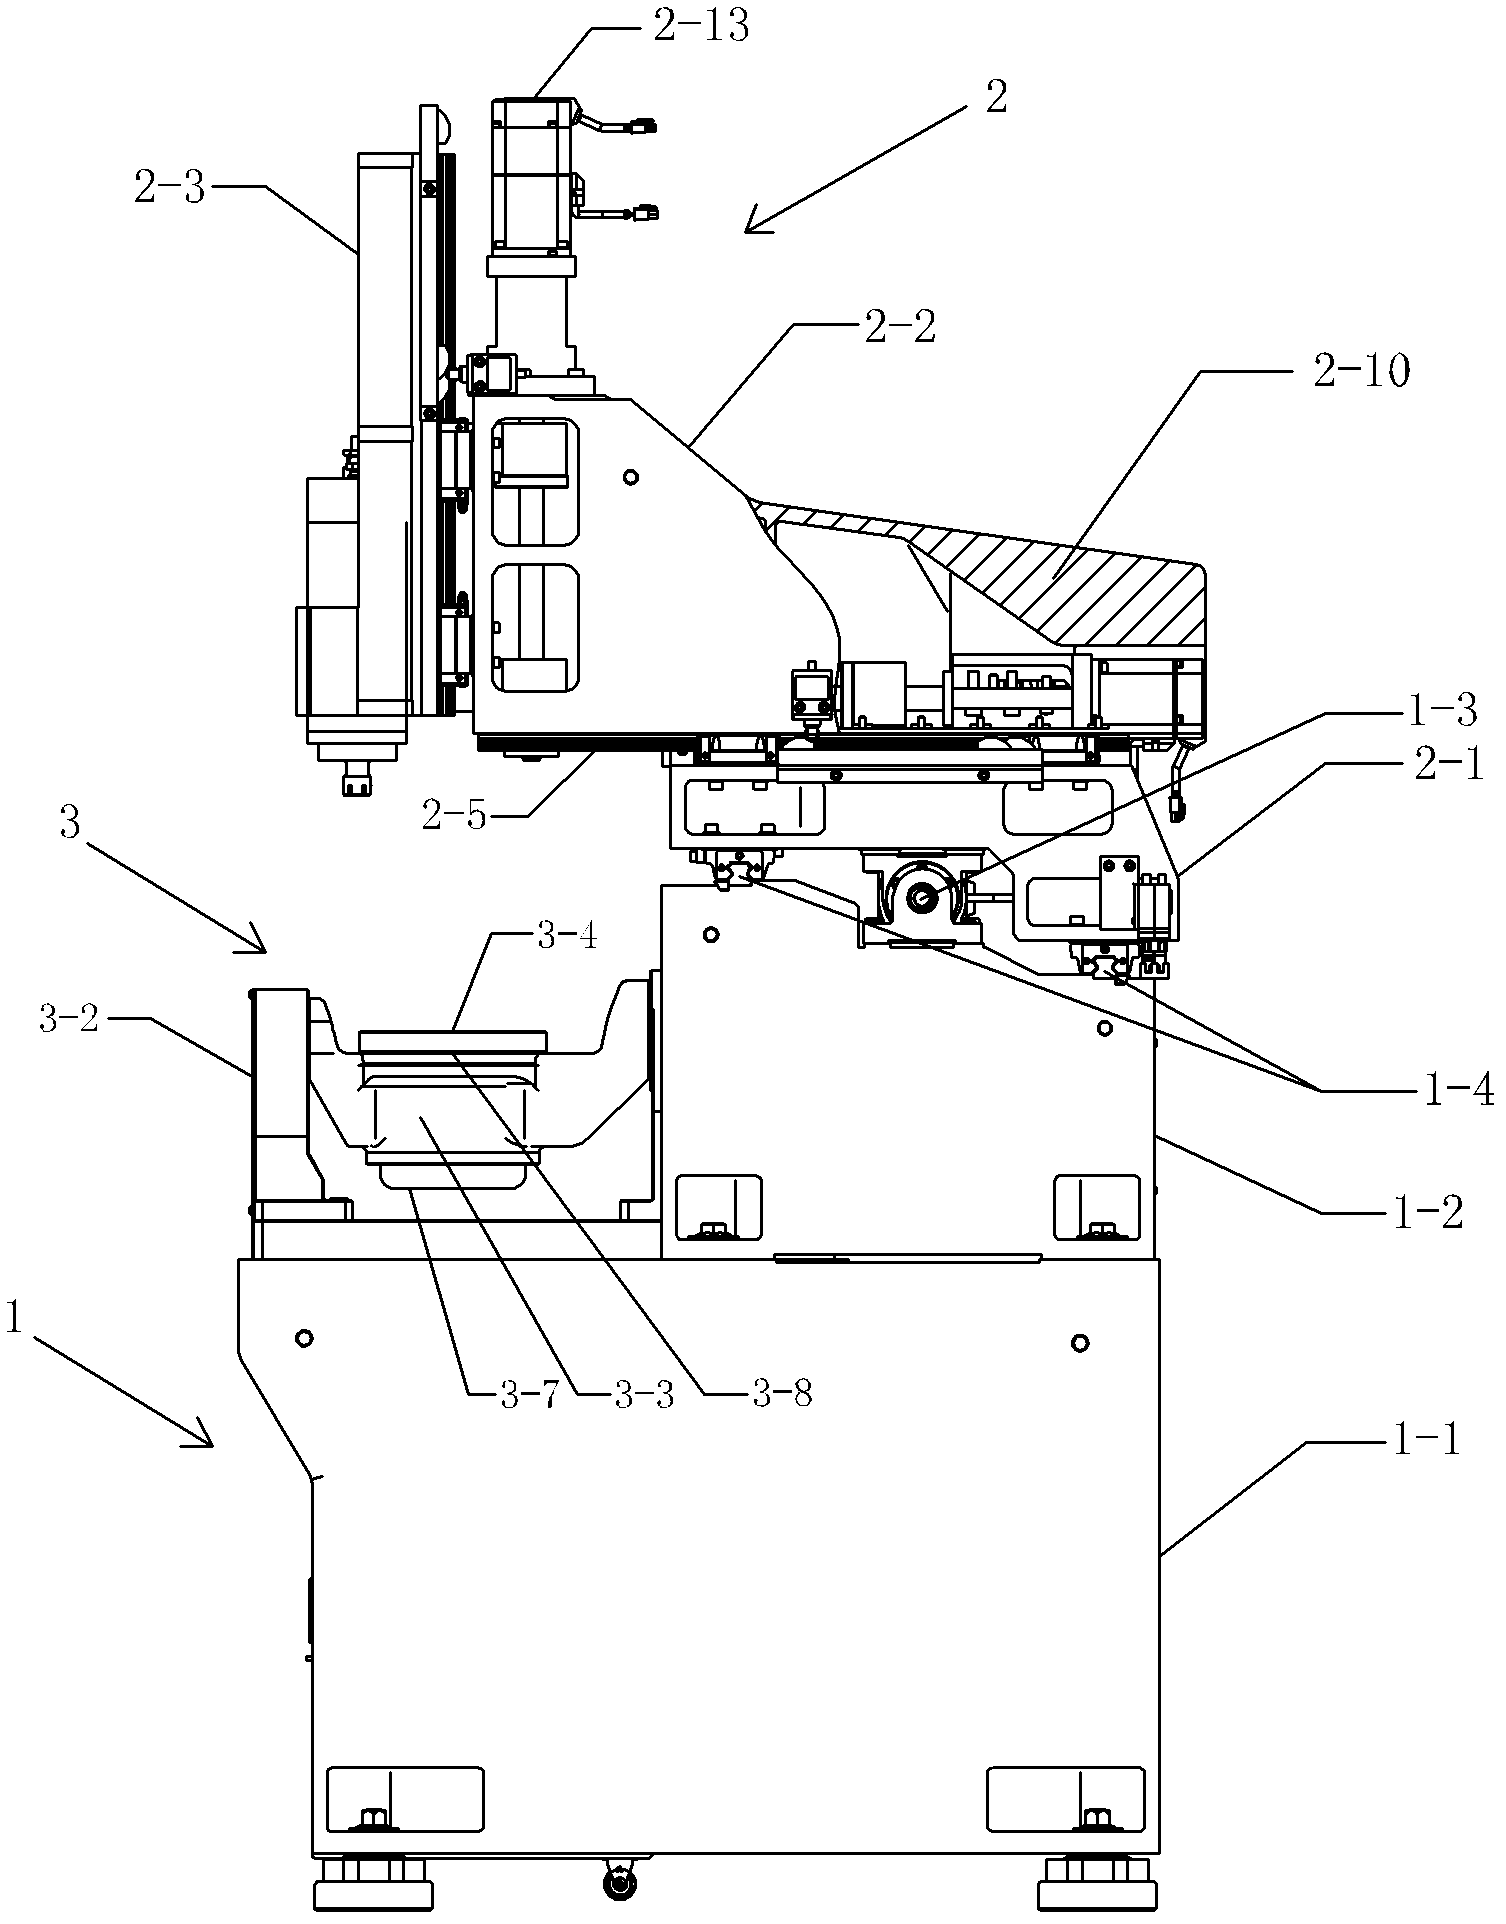 Small-sized five-axis machining center